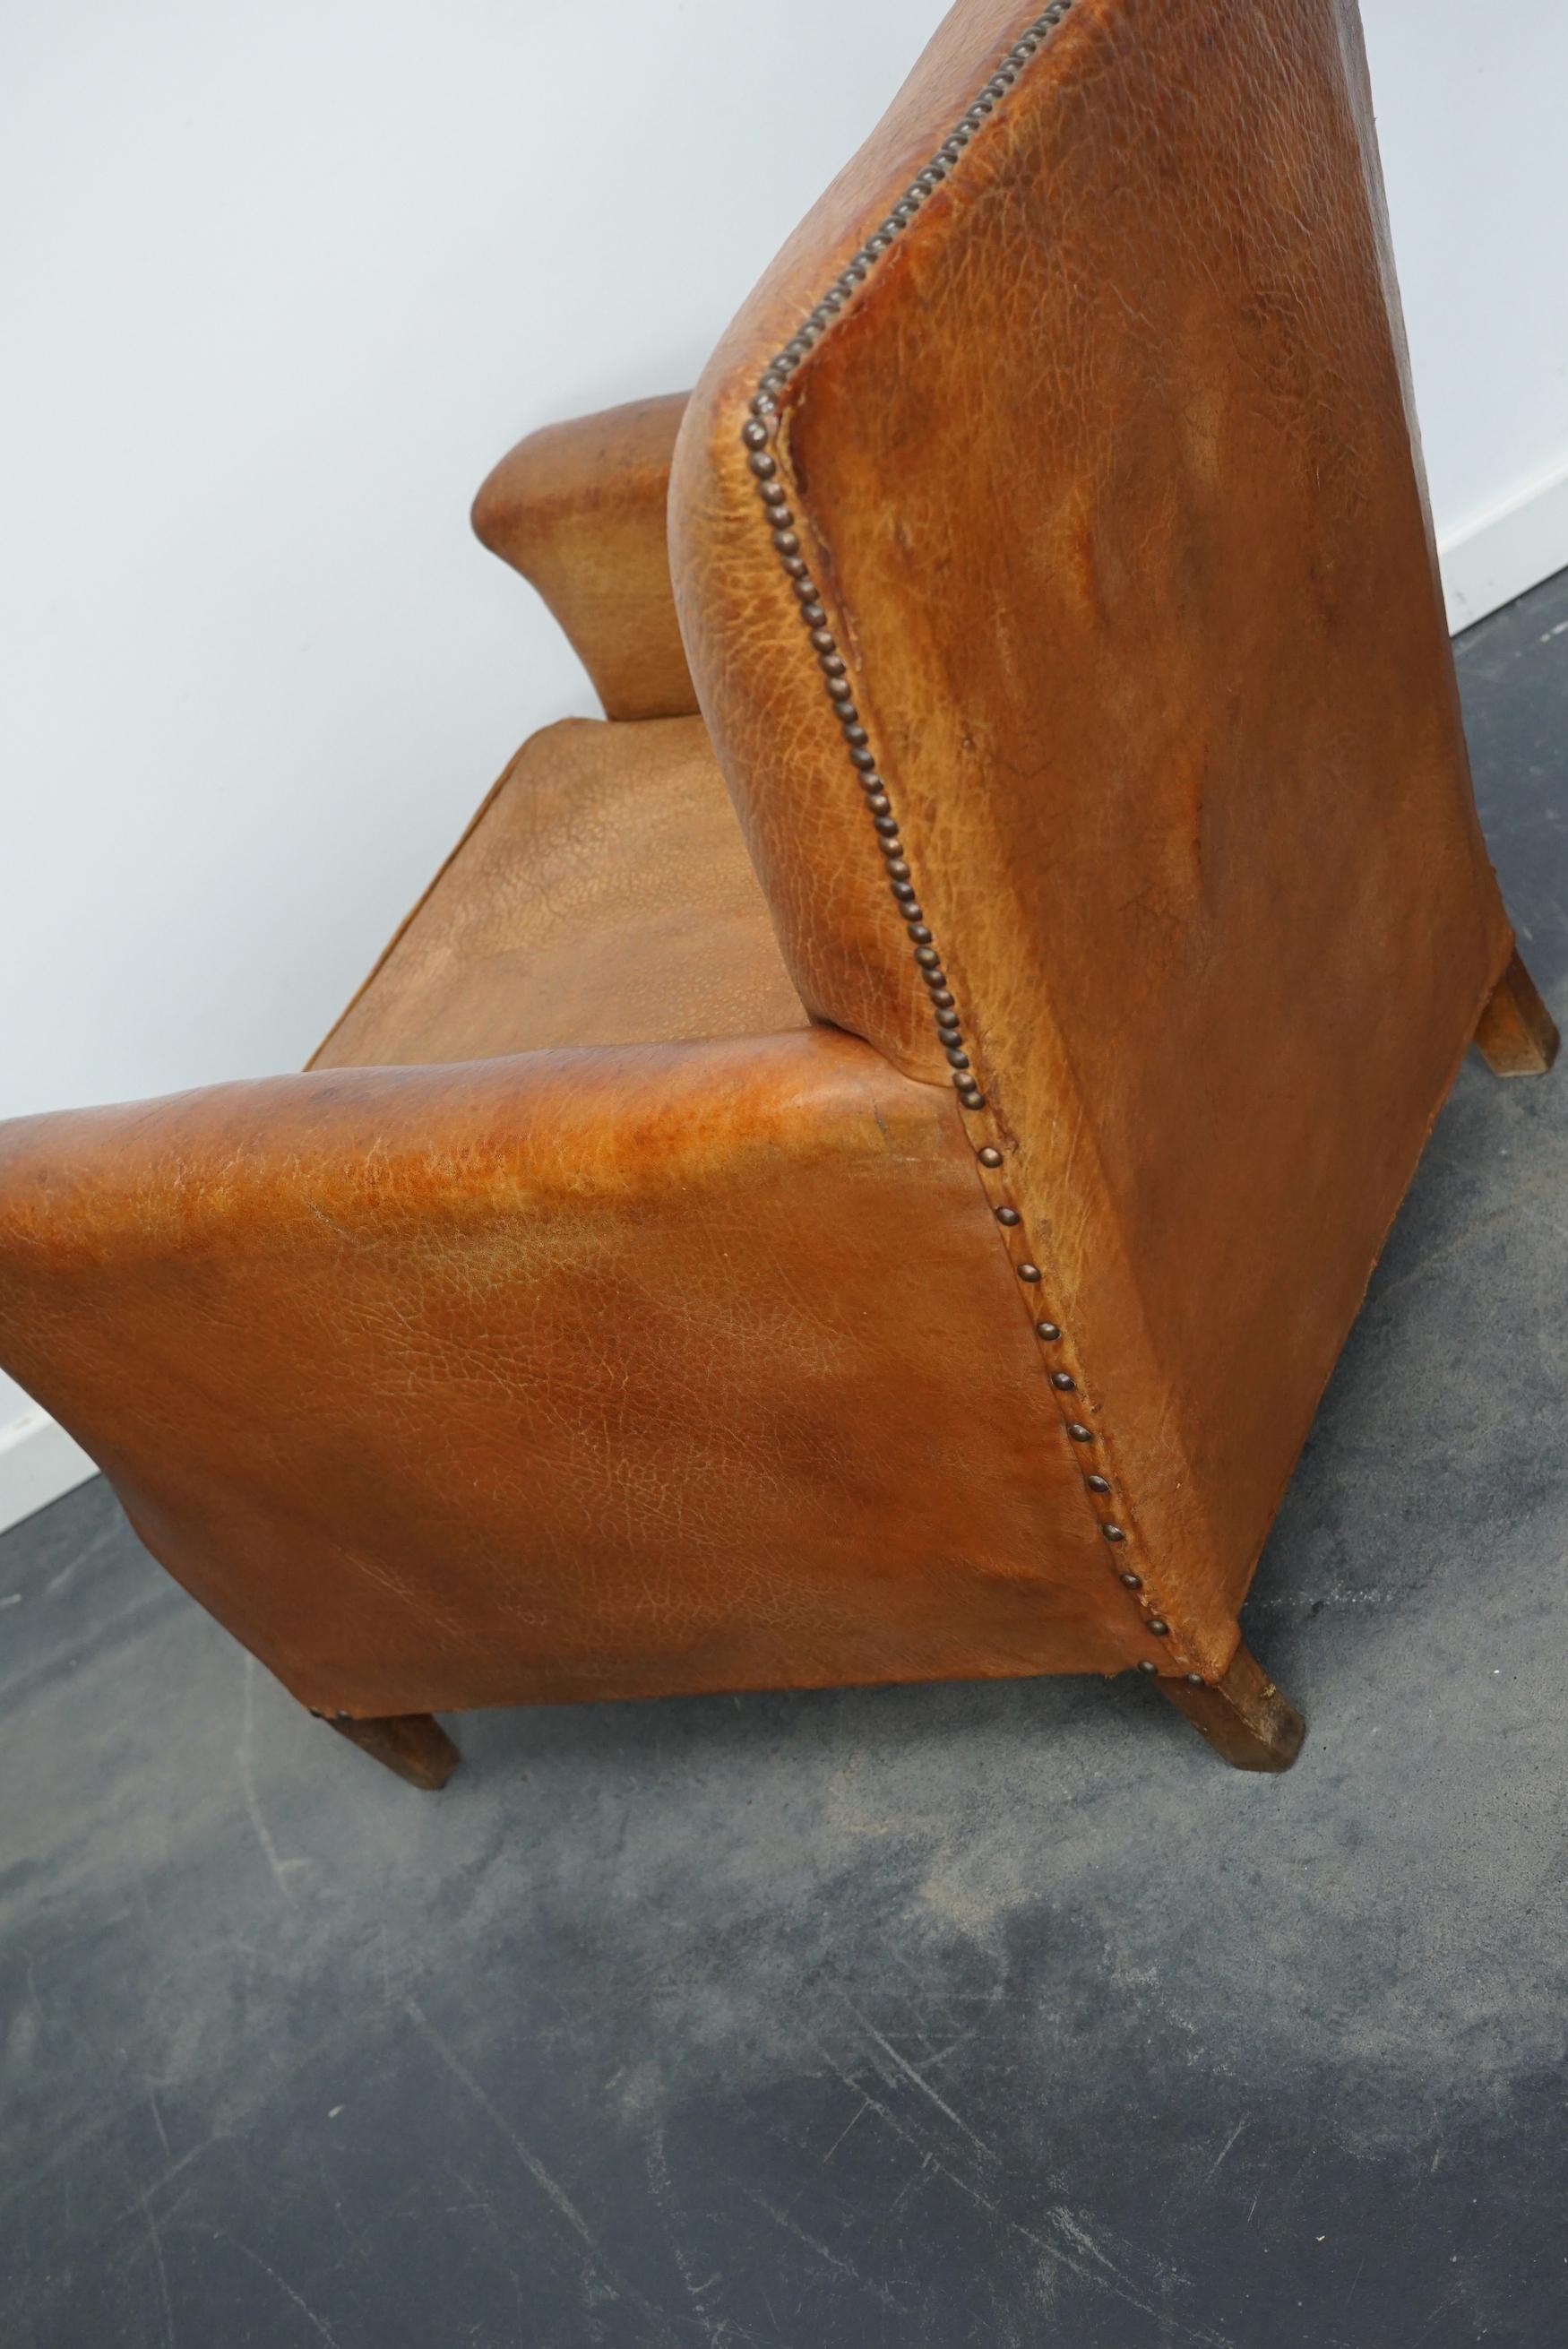 Vintage French Cognac-Colored Leather Club Chair, 1940s For Sale 9